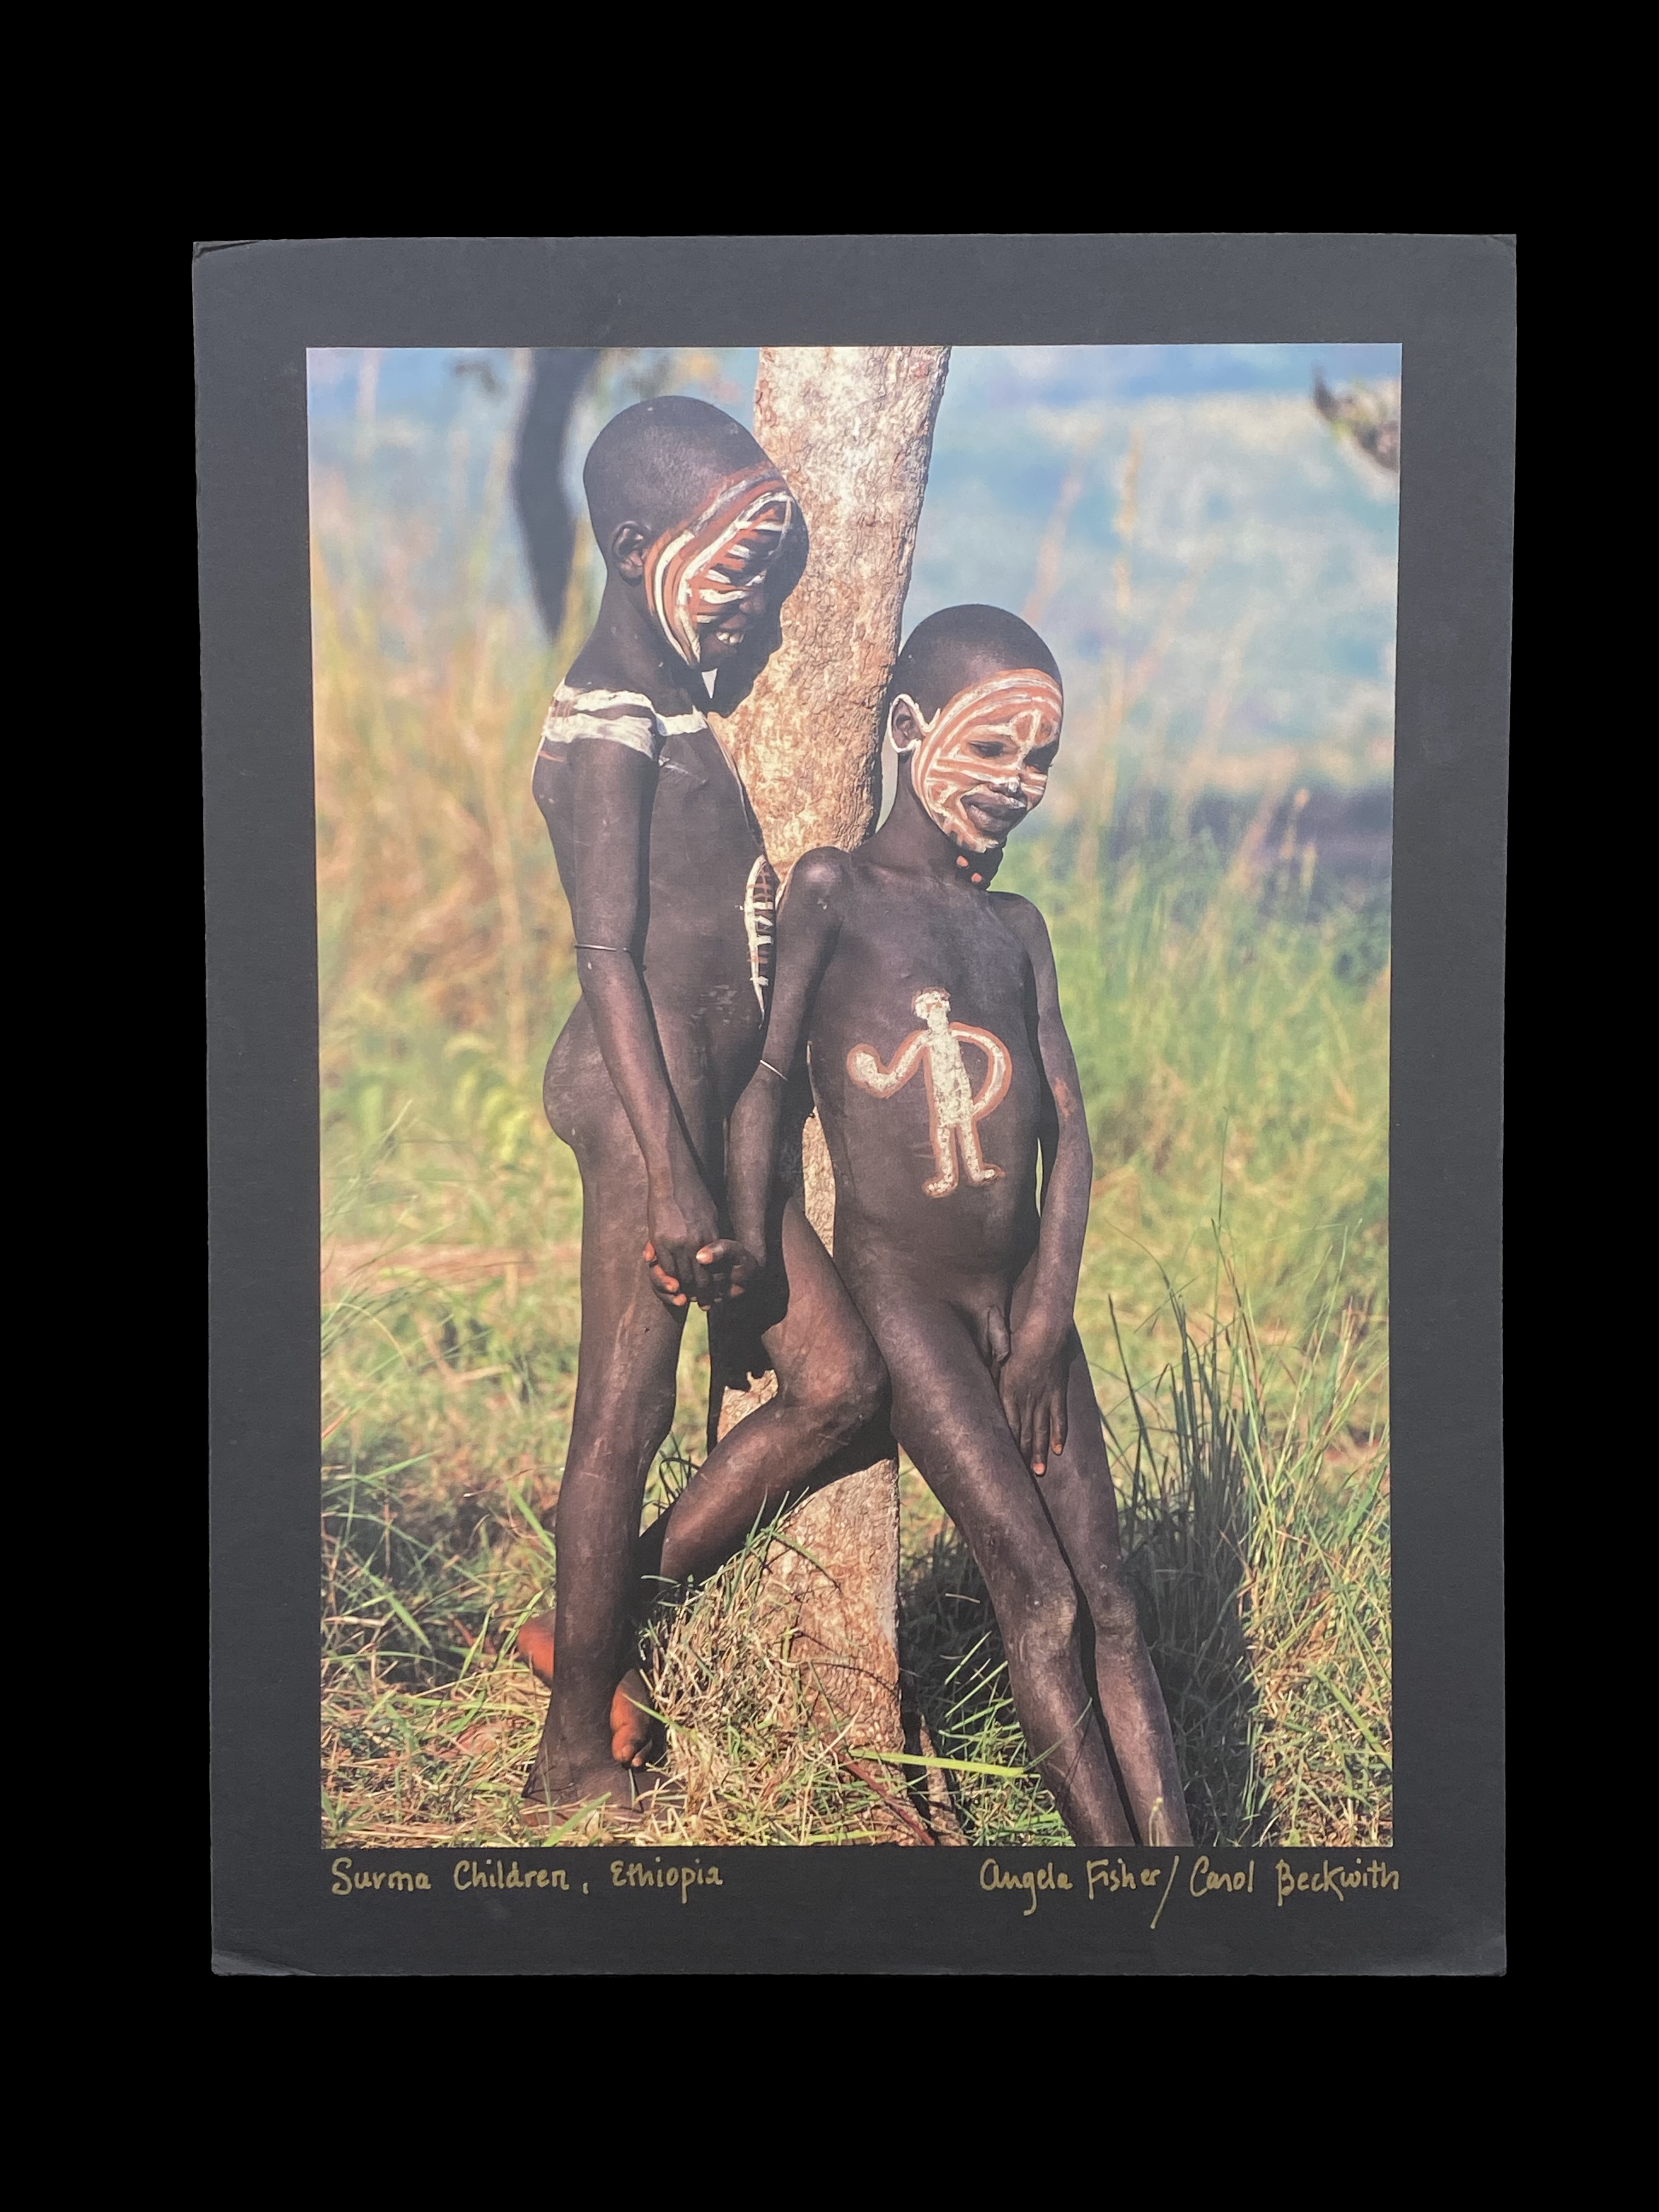 Mounted and Signed Photograph of Surma Children, Ethiopia - by Angela Fisher and Carol Beckwith